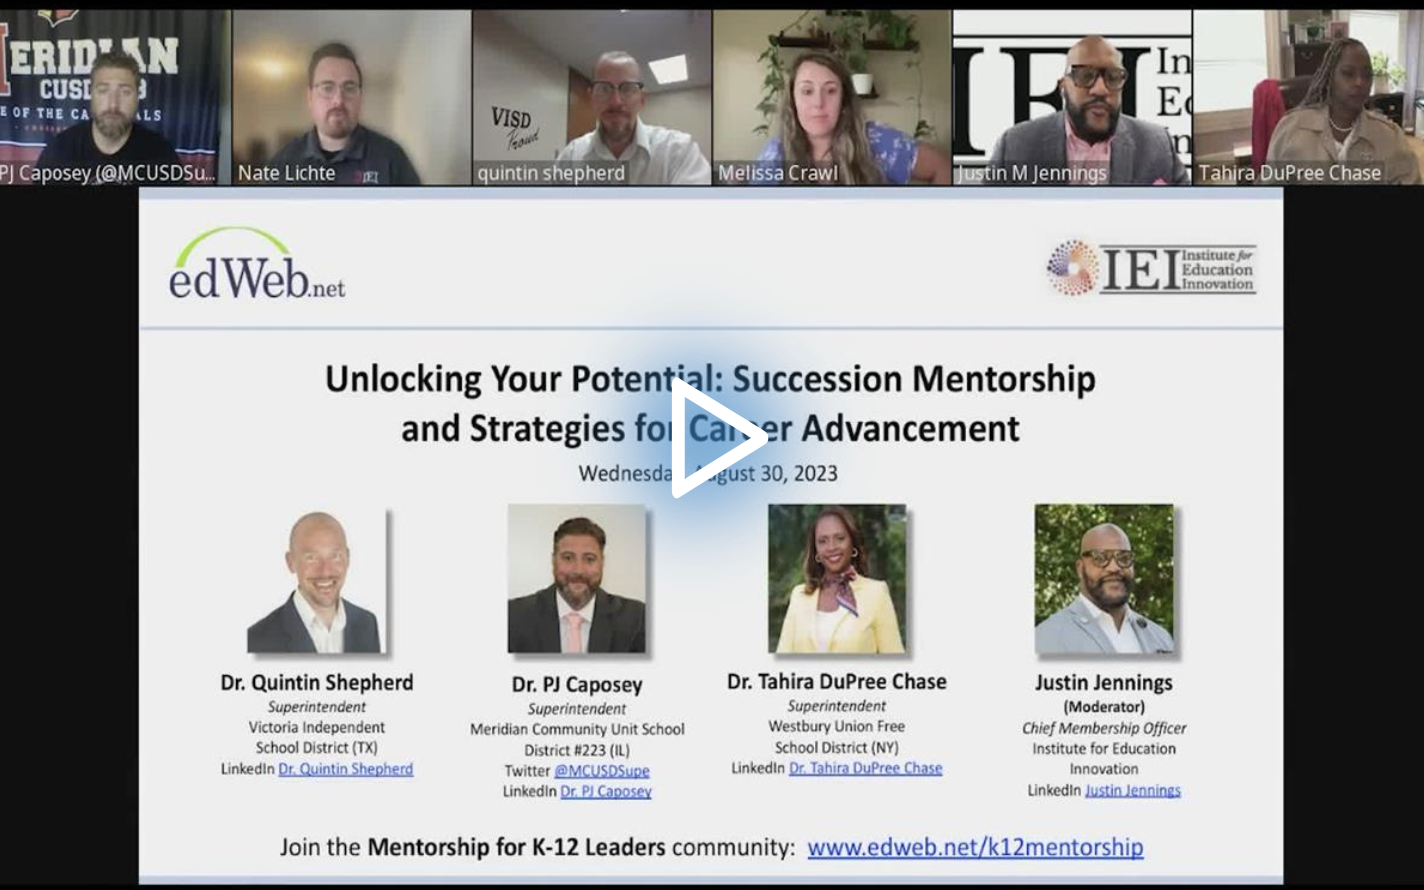 Unlocking Your Potential: Succession Mentorship and Strategies for Career Advancement edLeader Panel recording screenshot